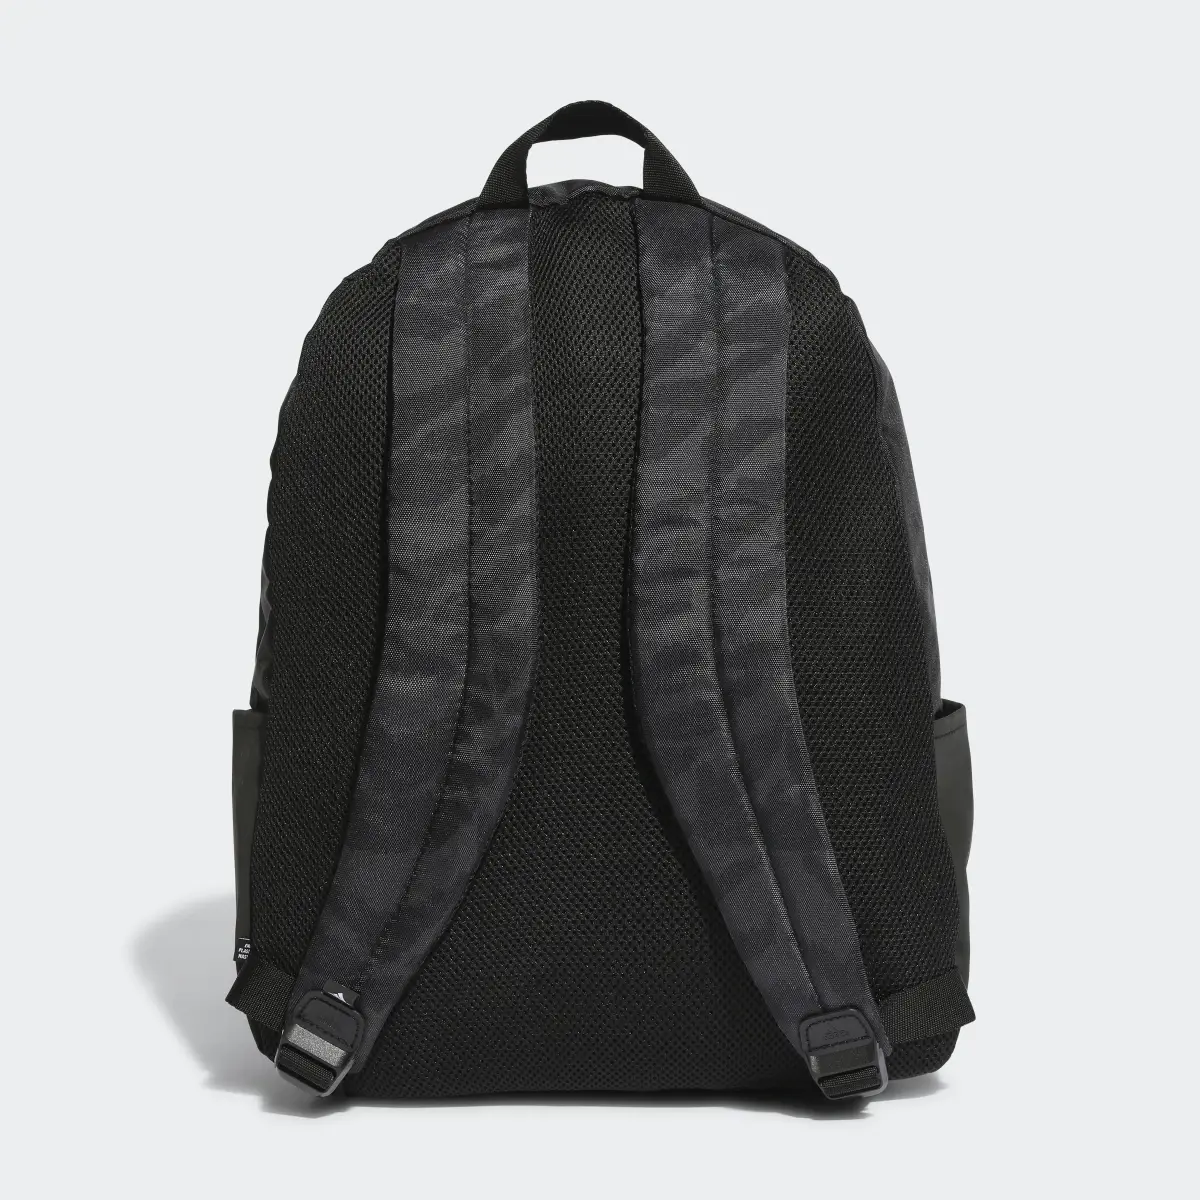 Adidas Back to School Badge of Sport Backpack. 3